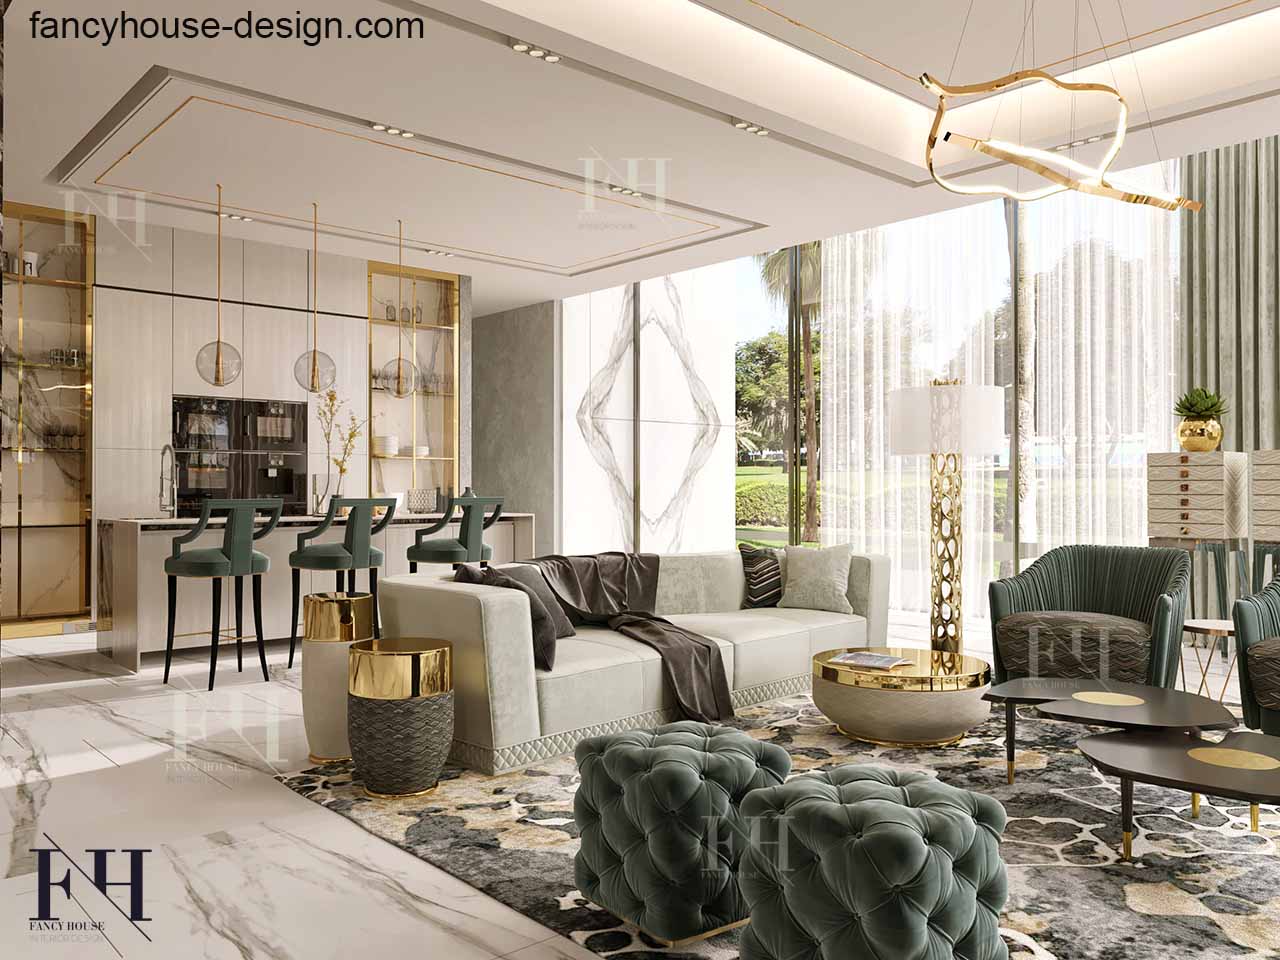 Luxury bespoke living room in Dubai with sitting kitchen island and dining bar